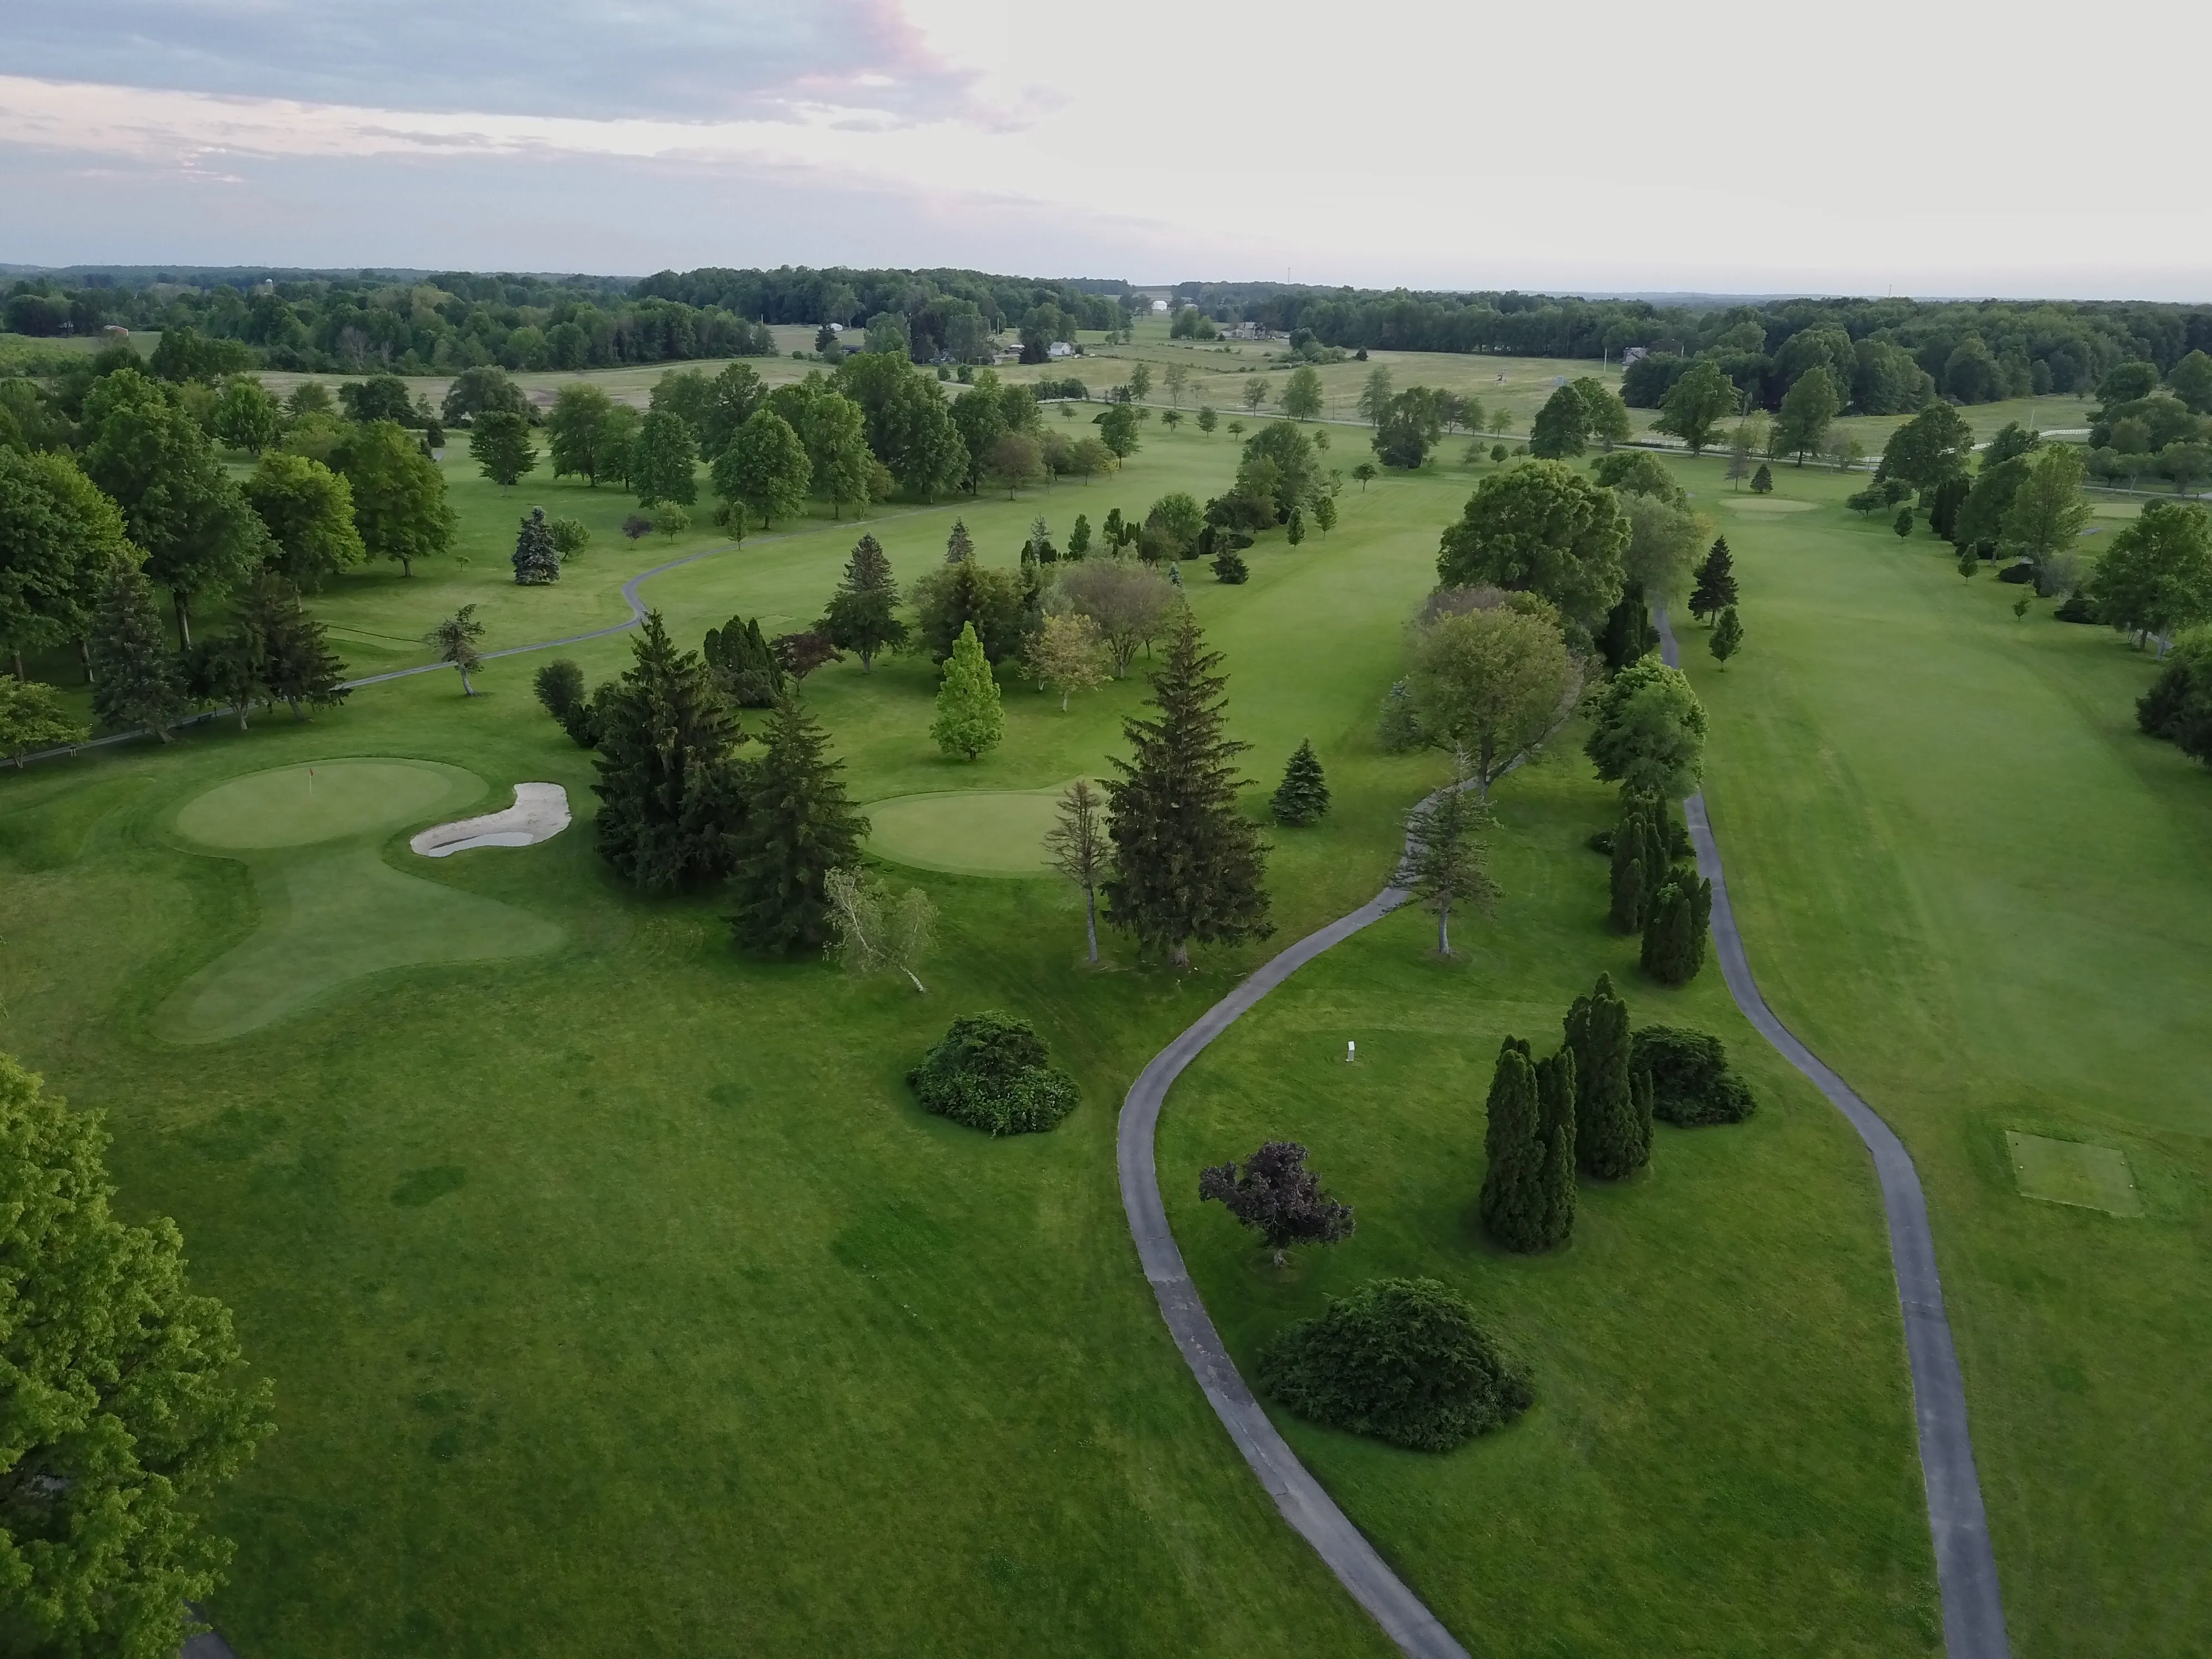 Aerial view of golf course with trees